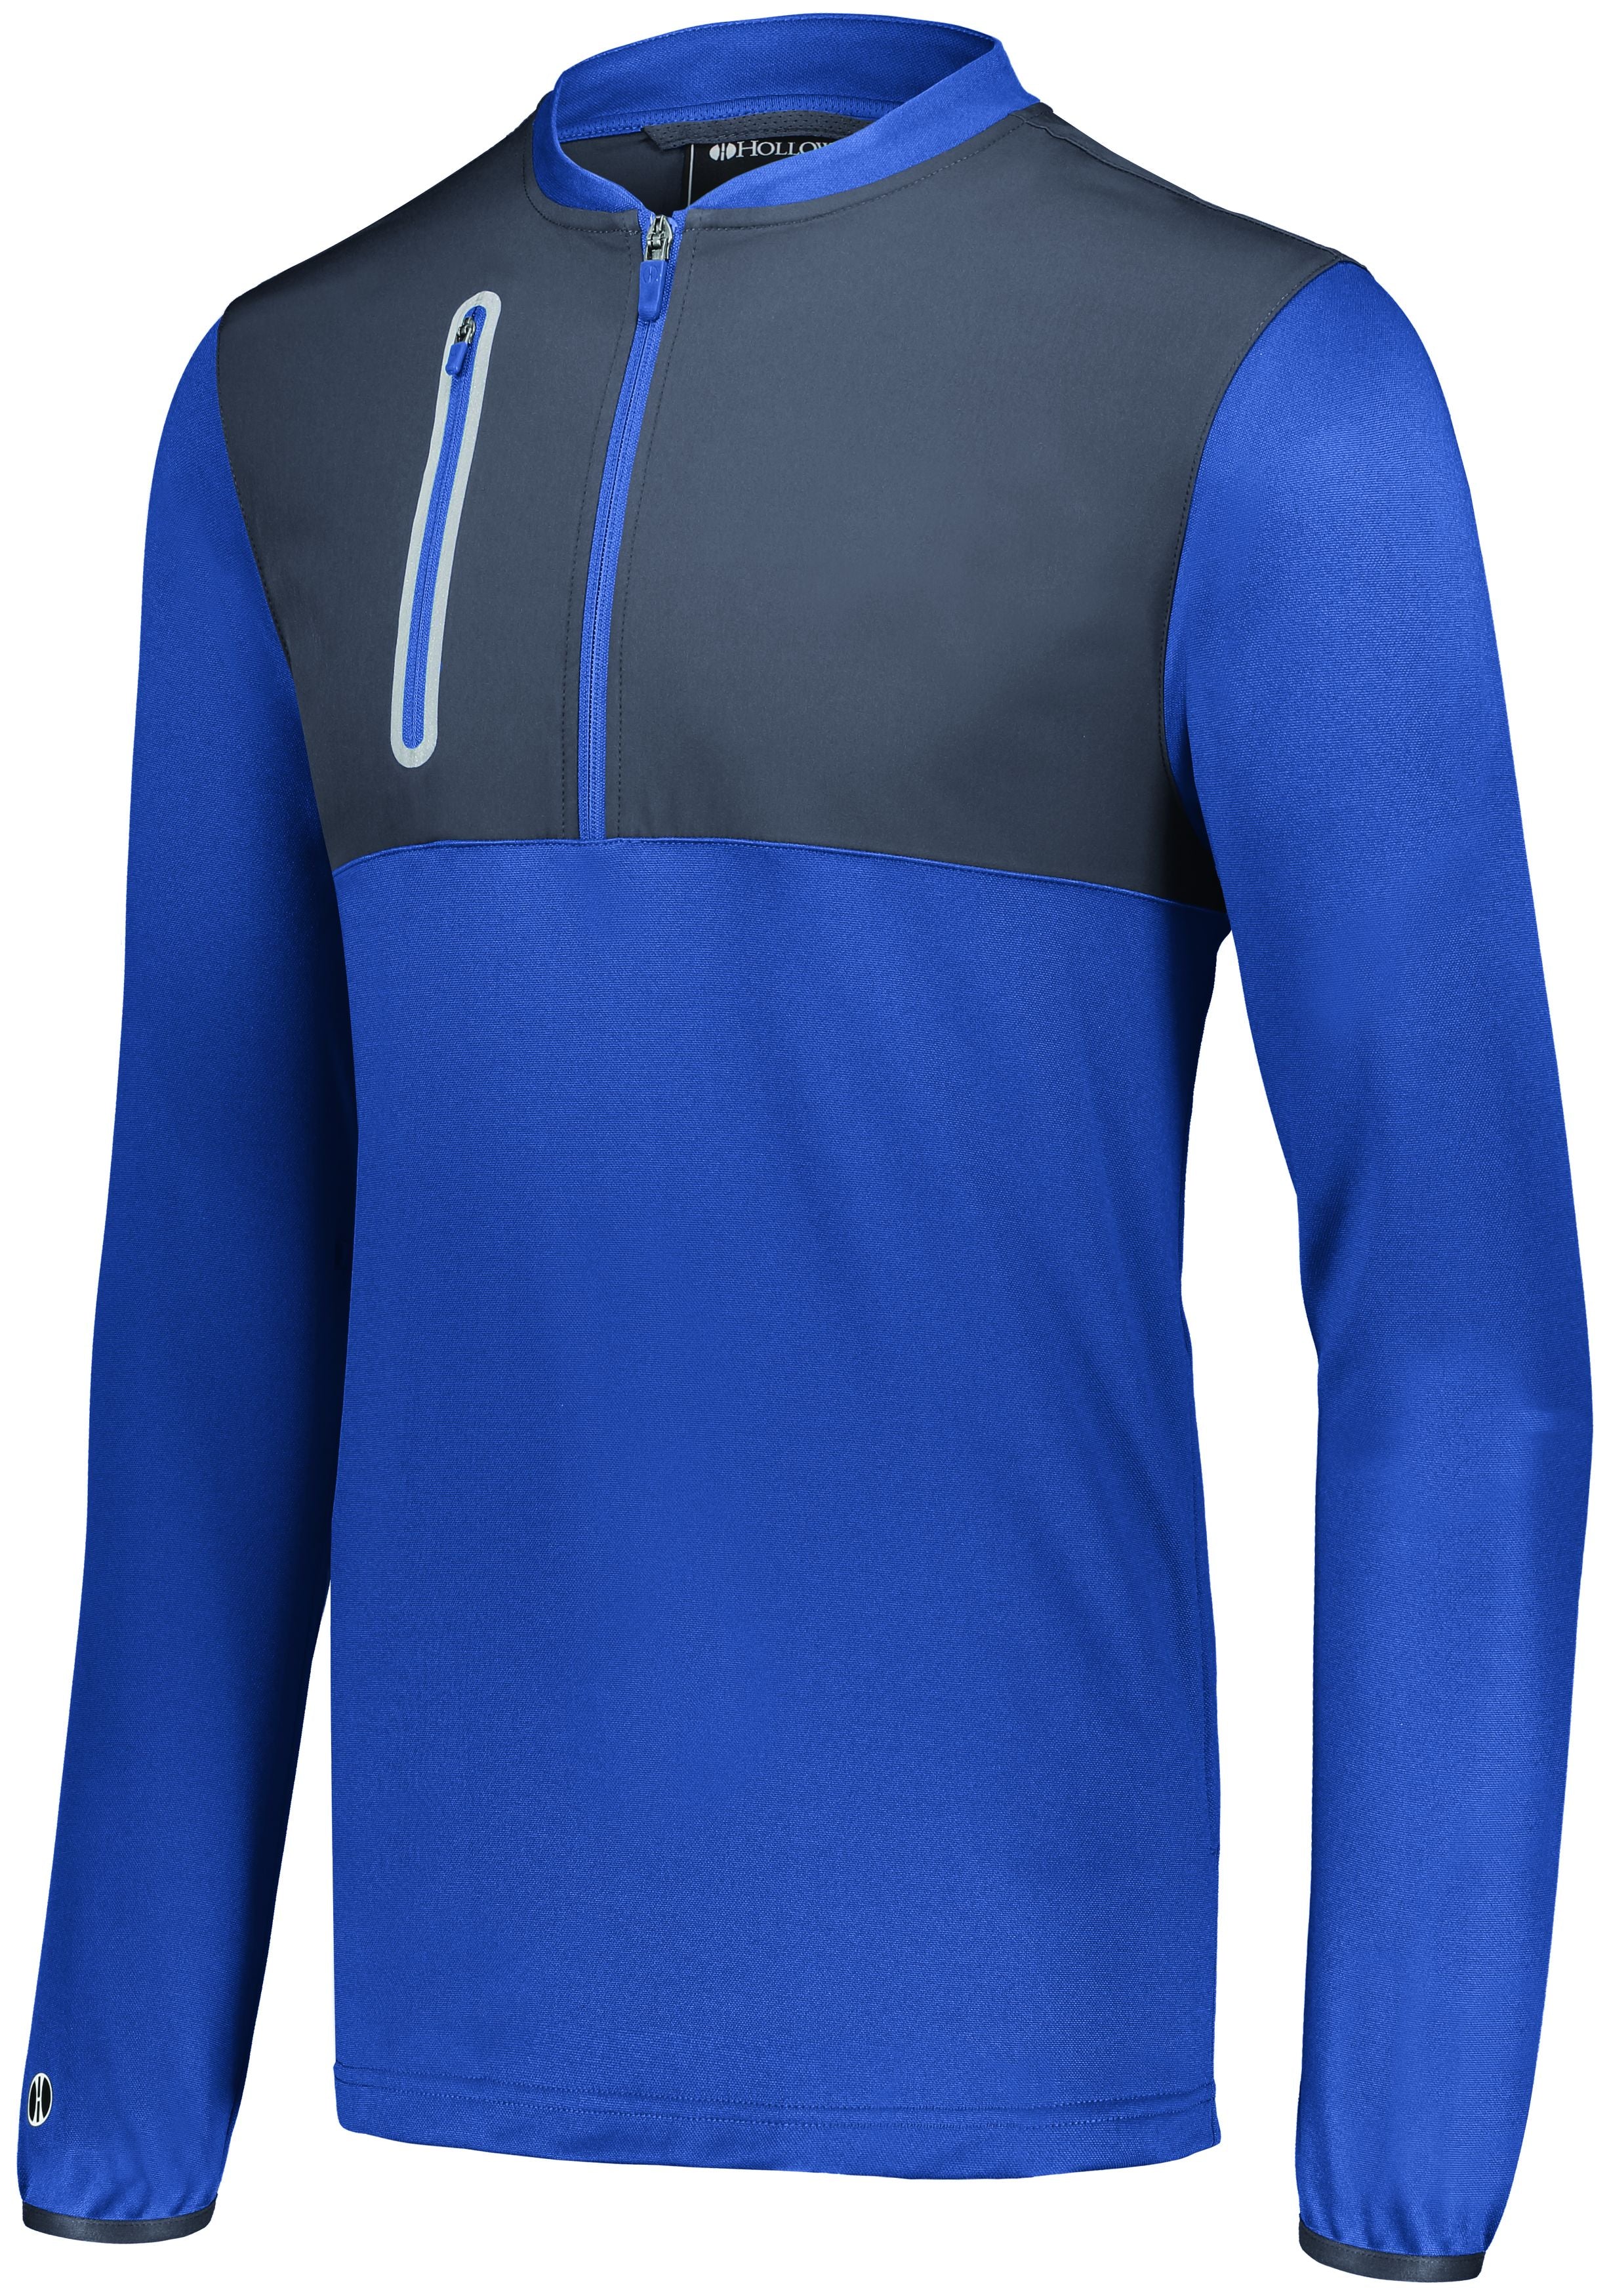 Holloway Weld Hybrid Pullover in Royal/Carbon  -Part of the Adult, Adult-Pullover, Holloway, Outerwear, Weld-Collection product lines at KanaleyCreations.com